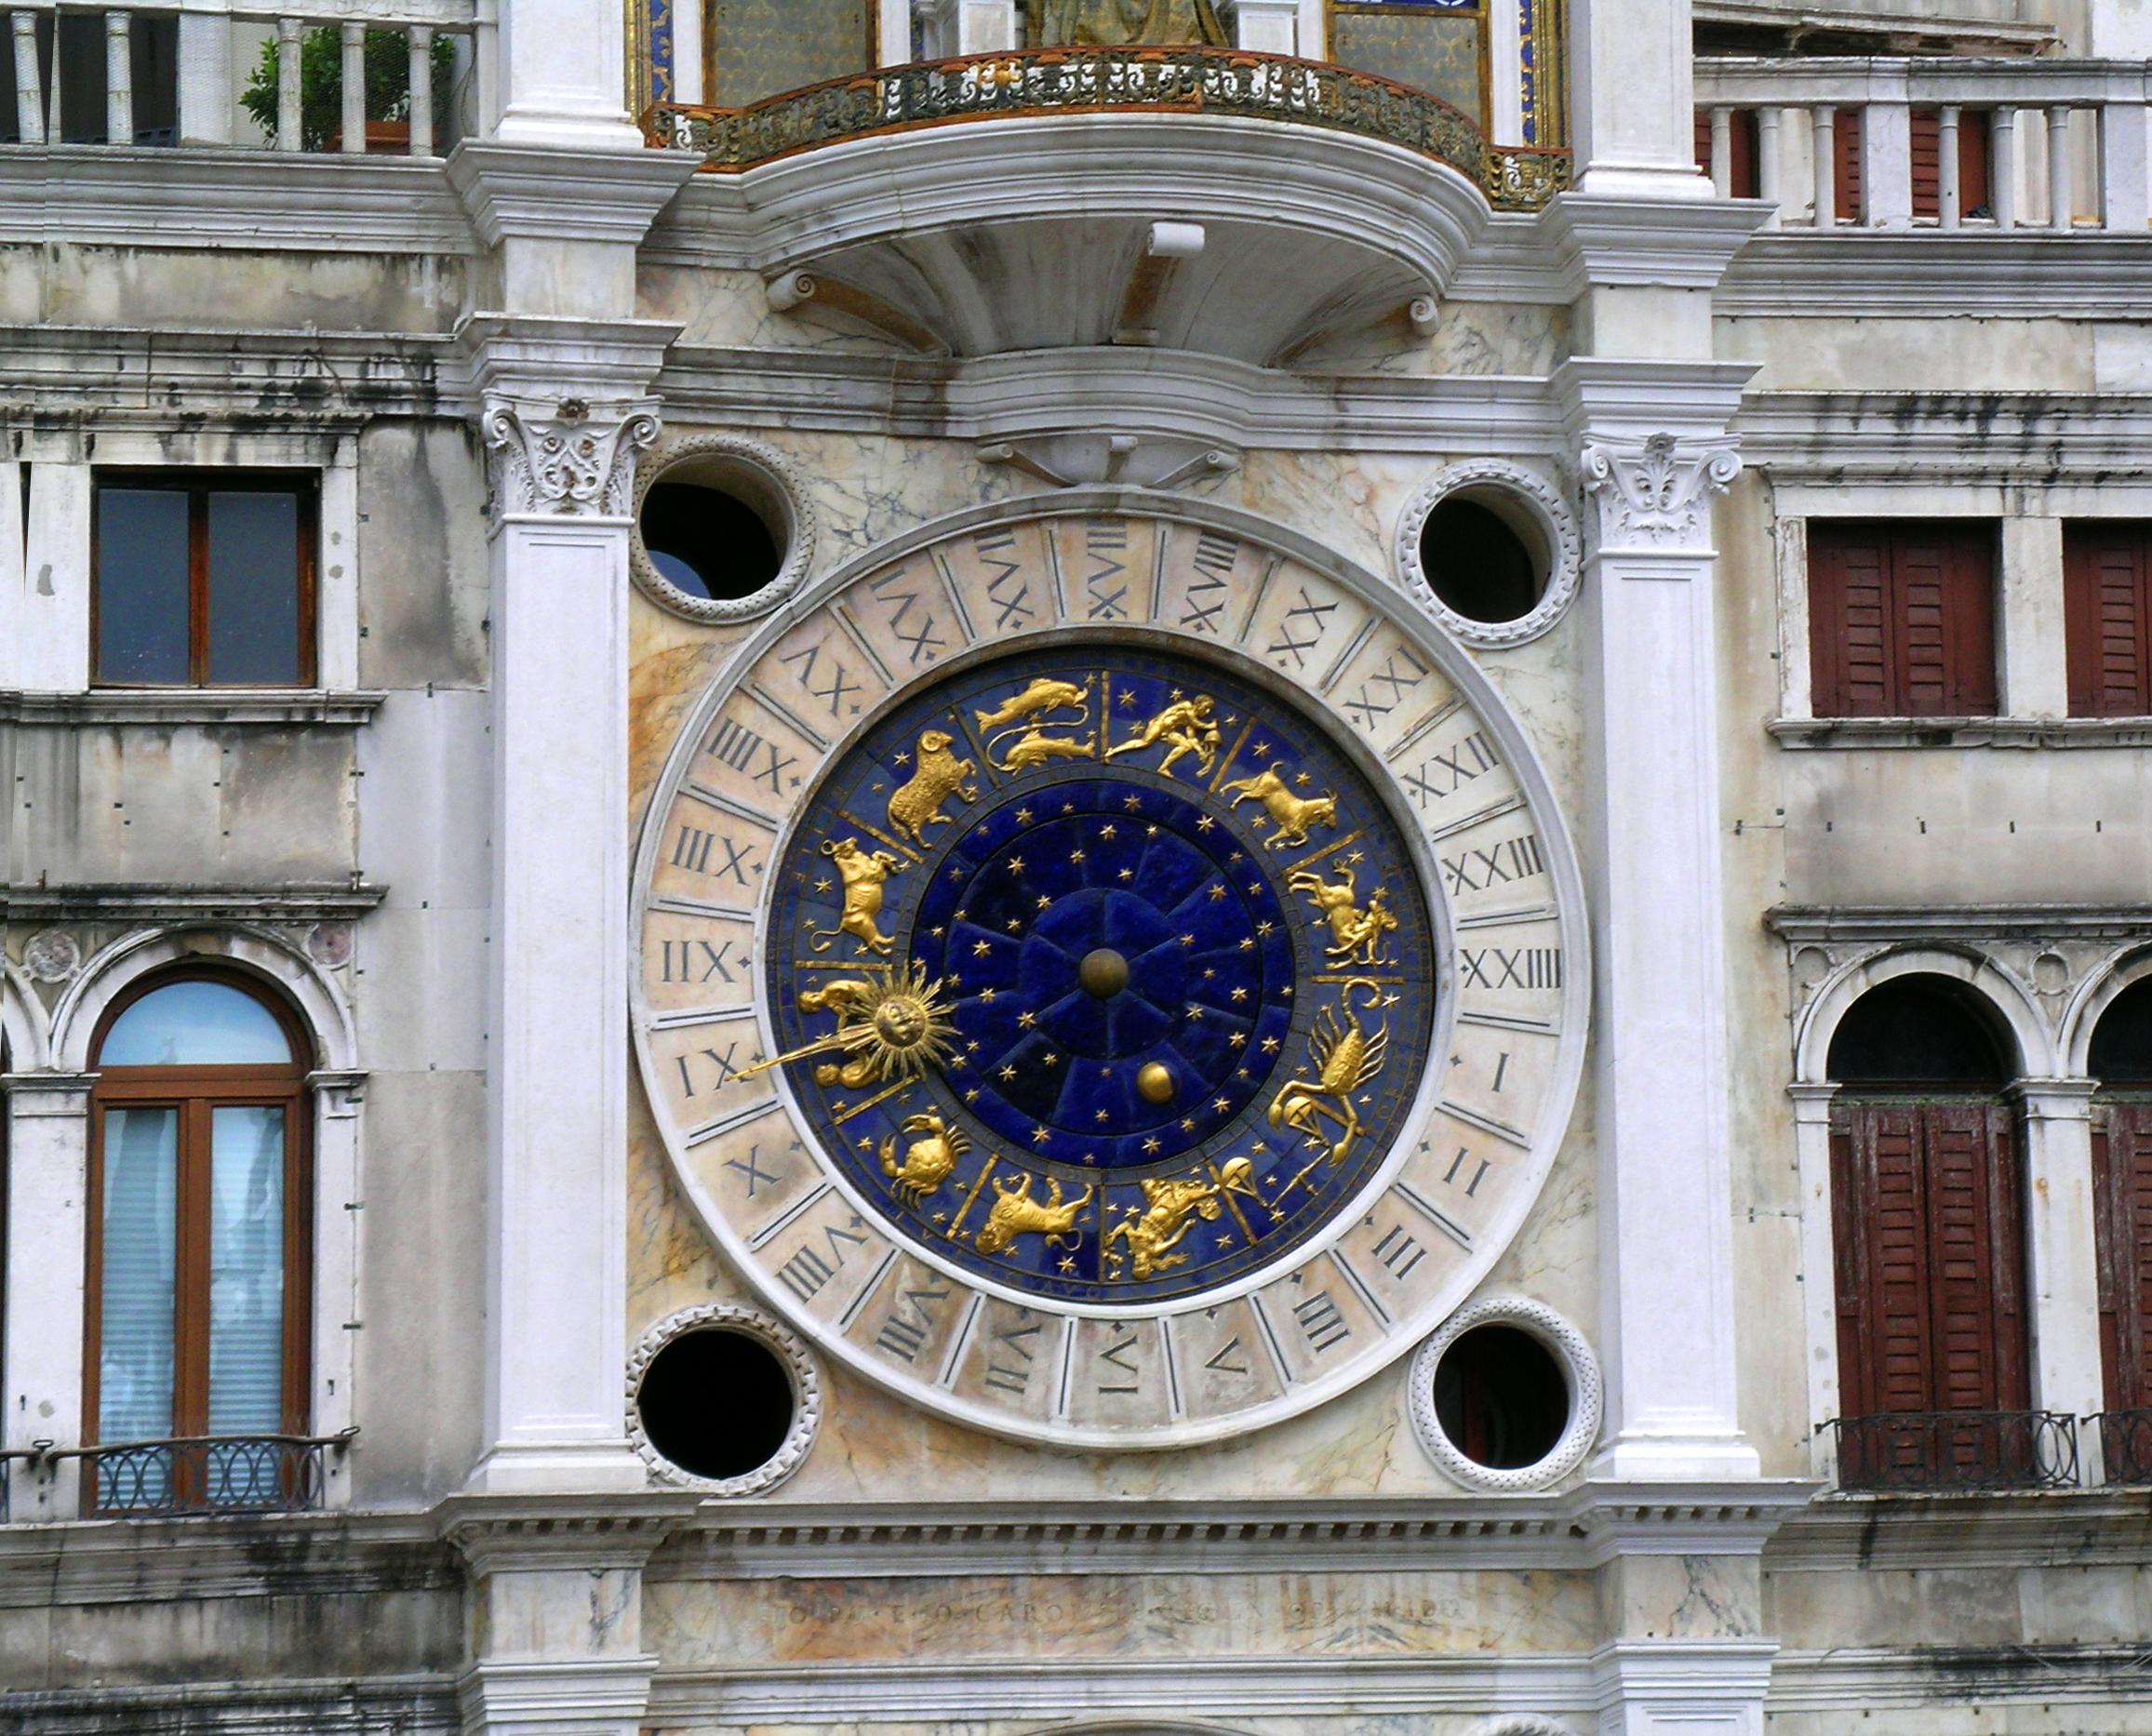 Cover image of this place Torre dell'Orologio / Clock Tower